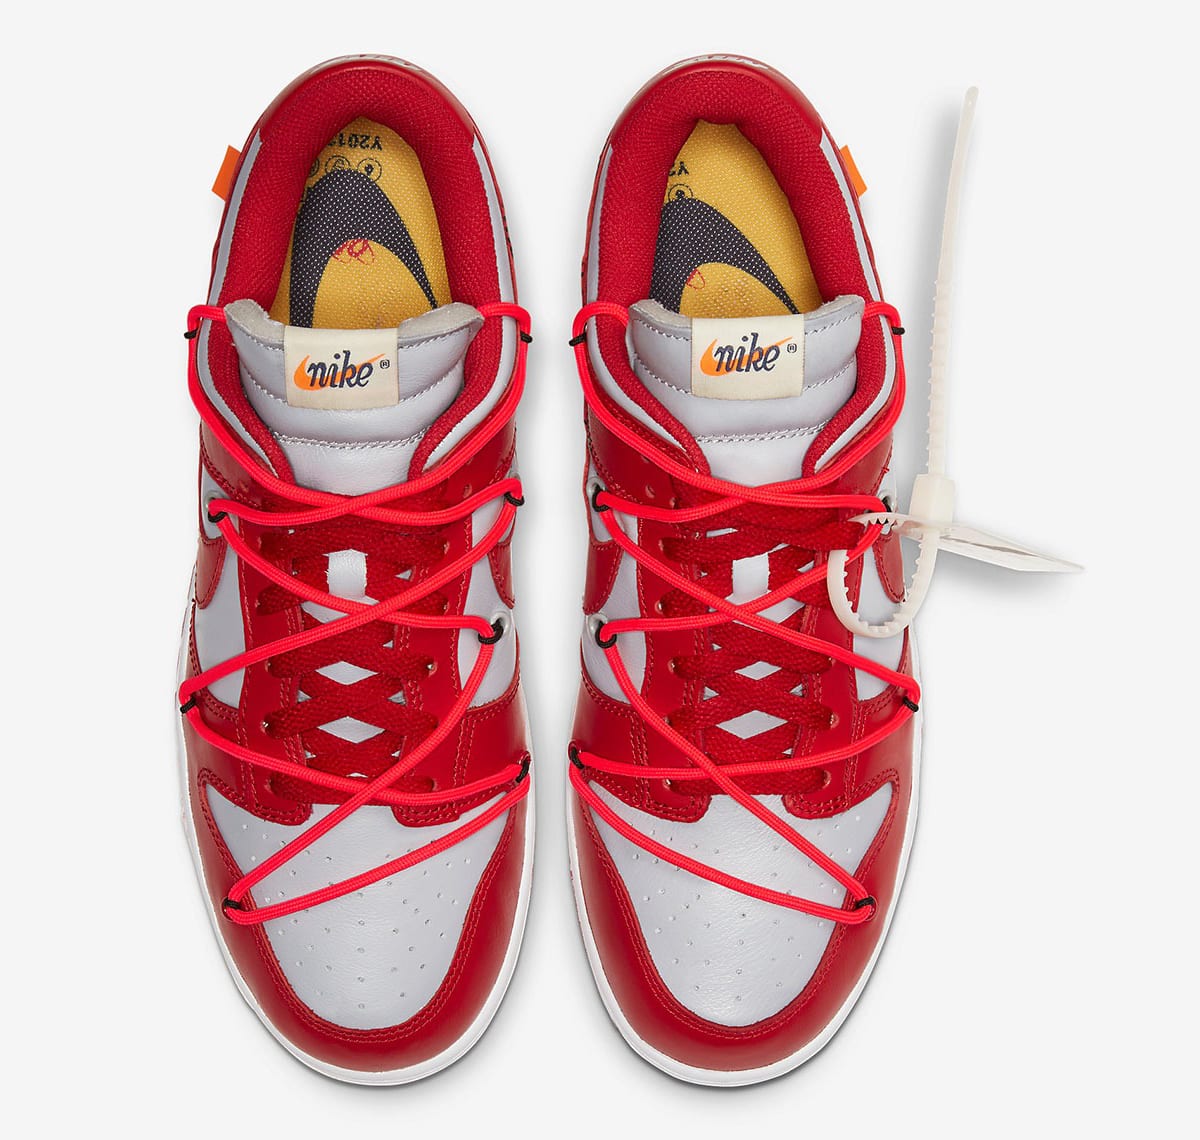 Off-White x Nike Dunk Low University Red University Red Wolf Grey CT0856-600 4